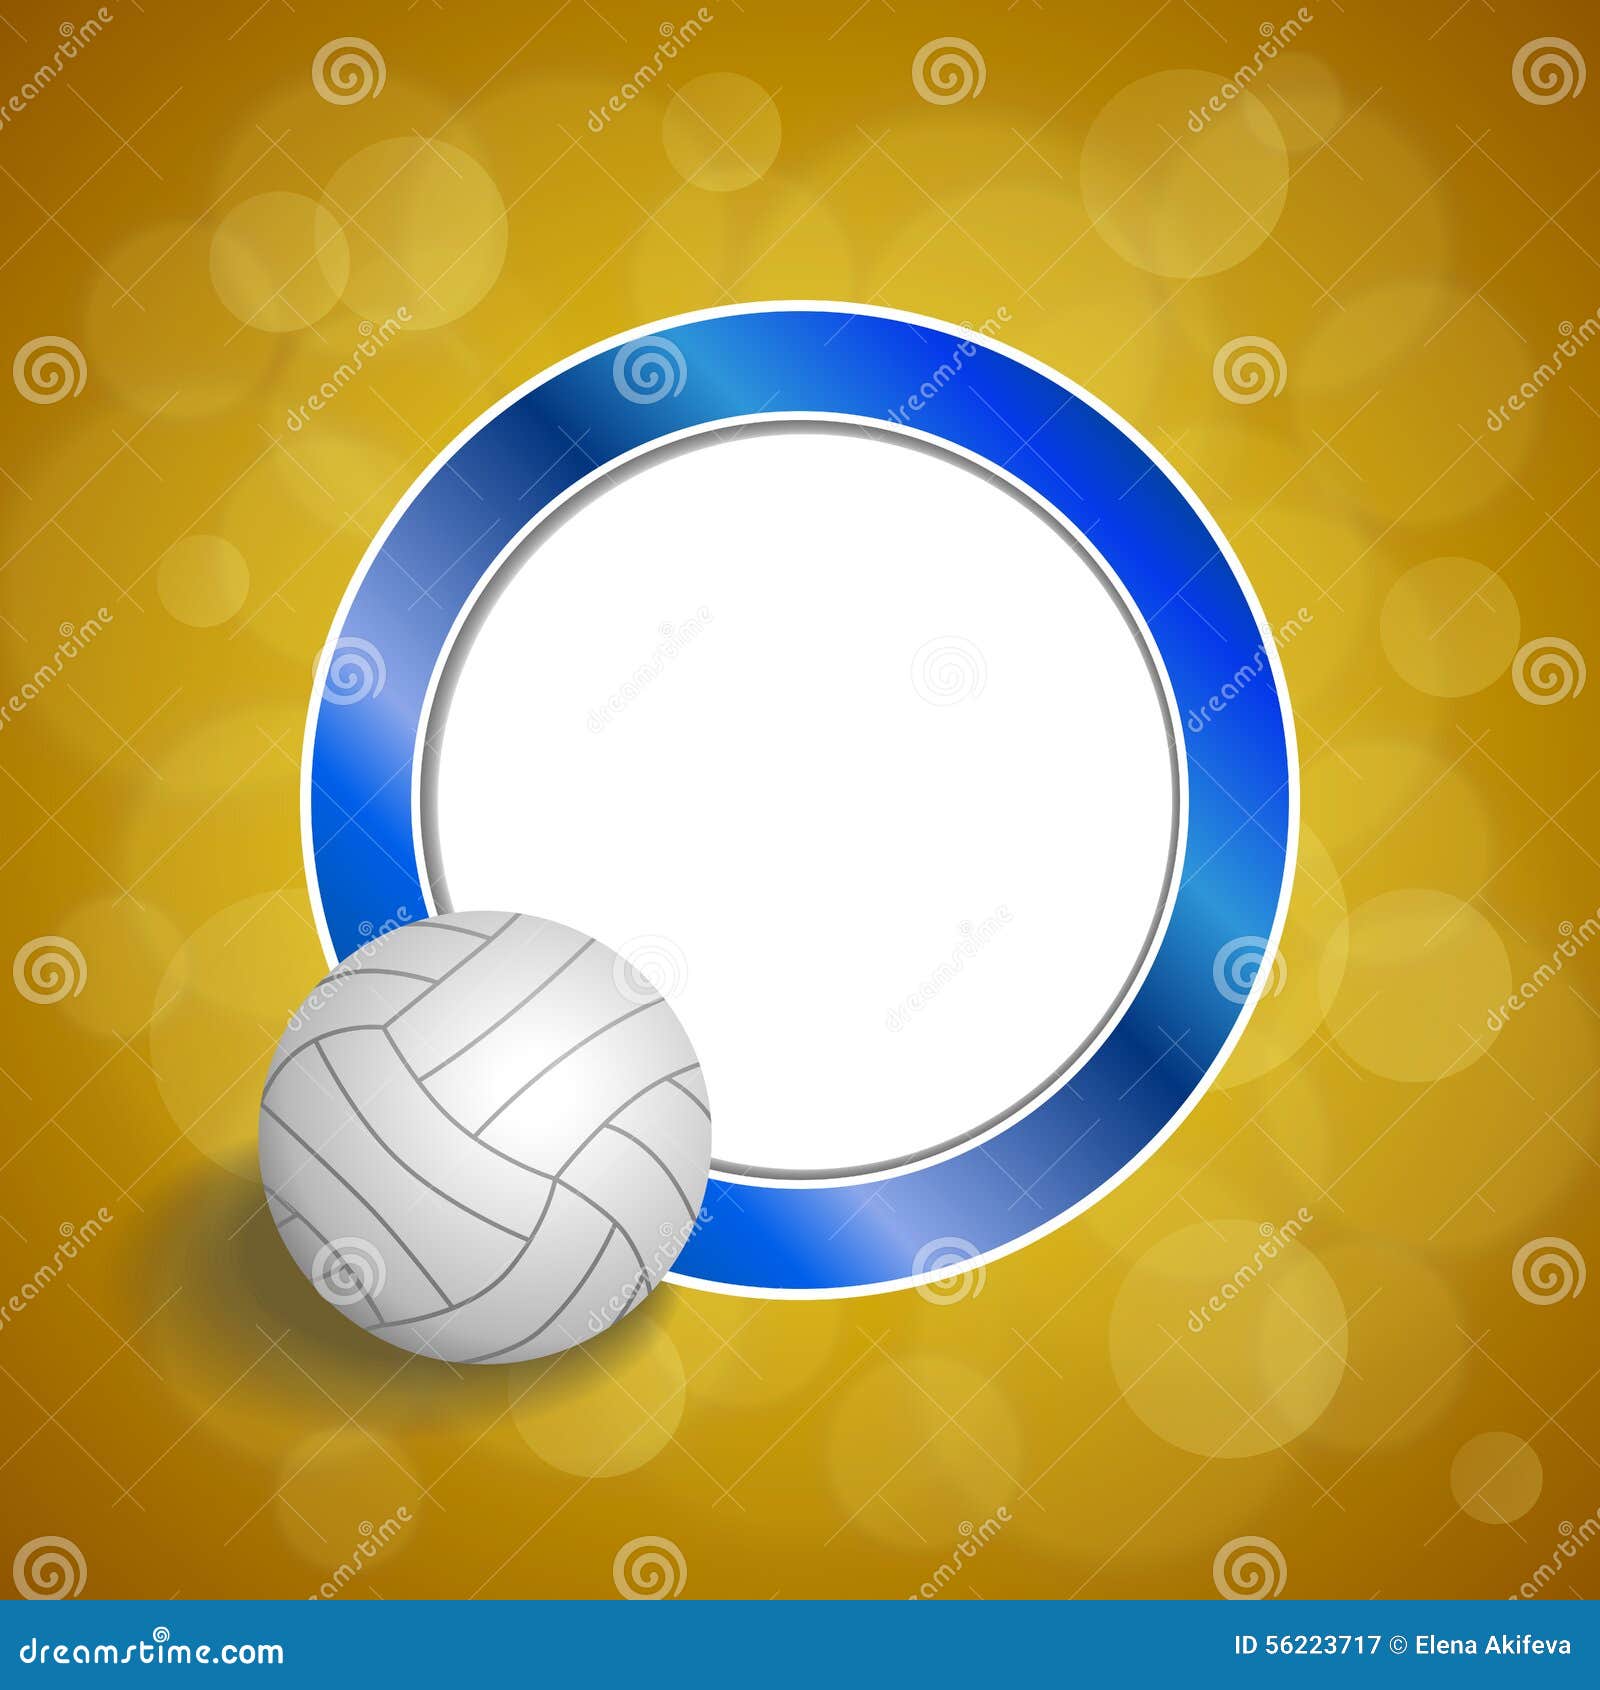 Background Abstract Volleyball Blue Yellow Ball Circle Frame ...